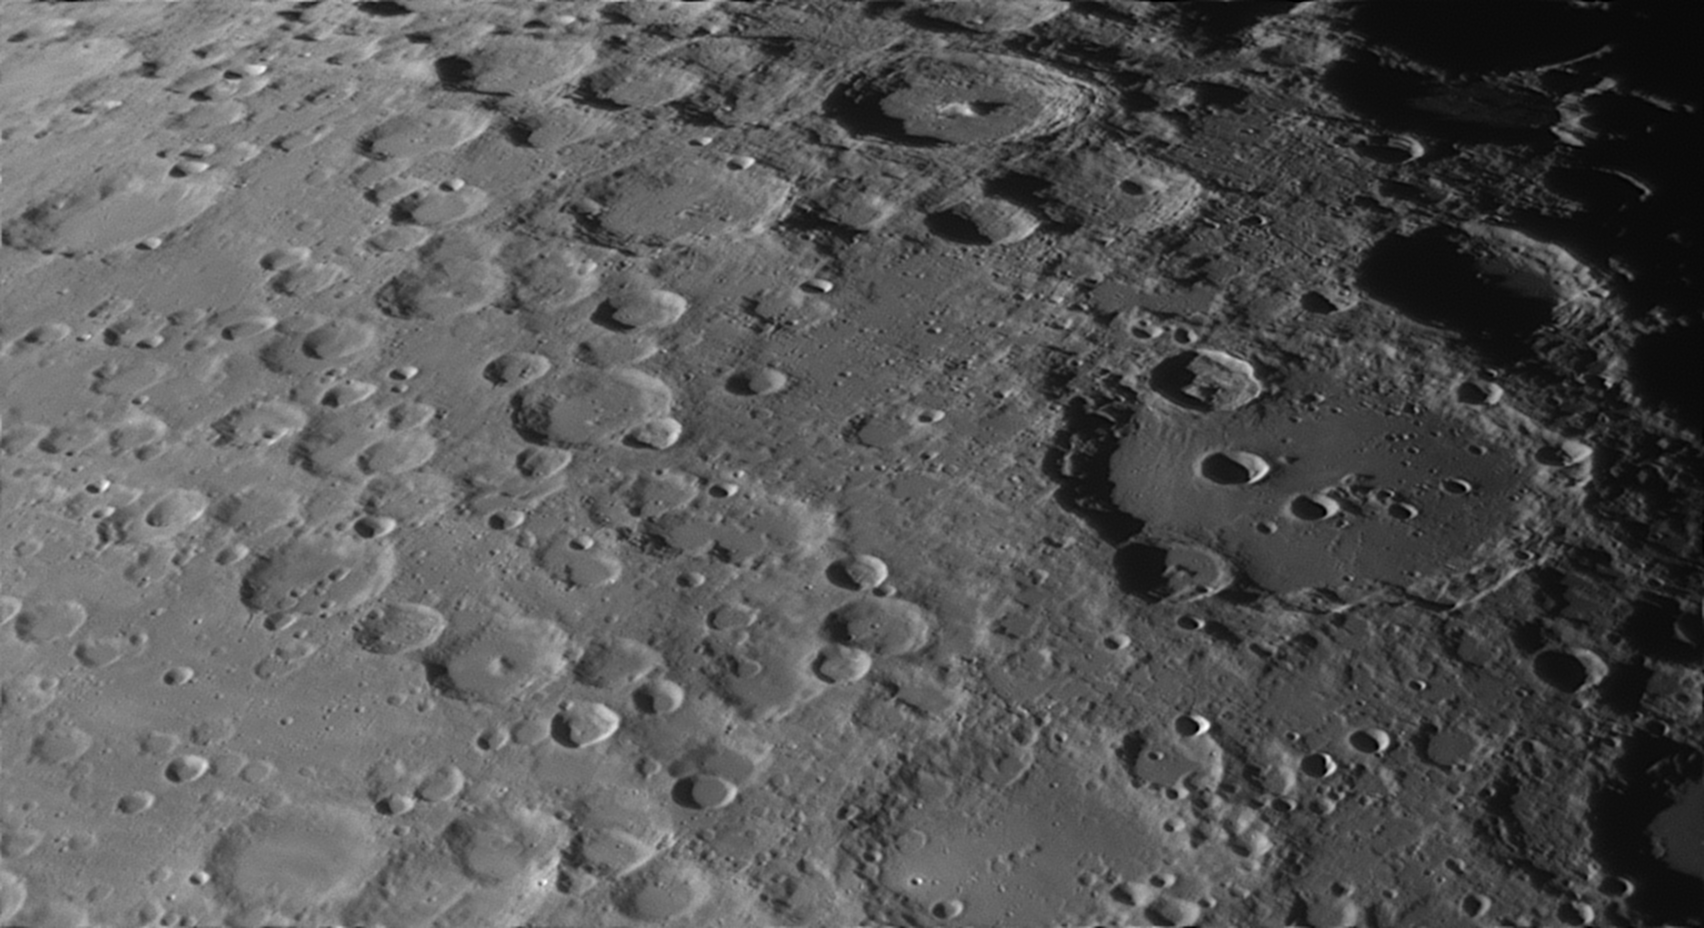 Clavius.png.9559baed235f3566a58318785bff33e1.png